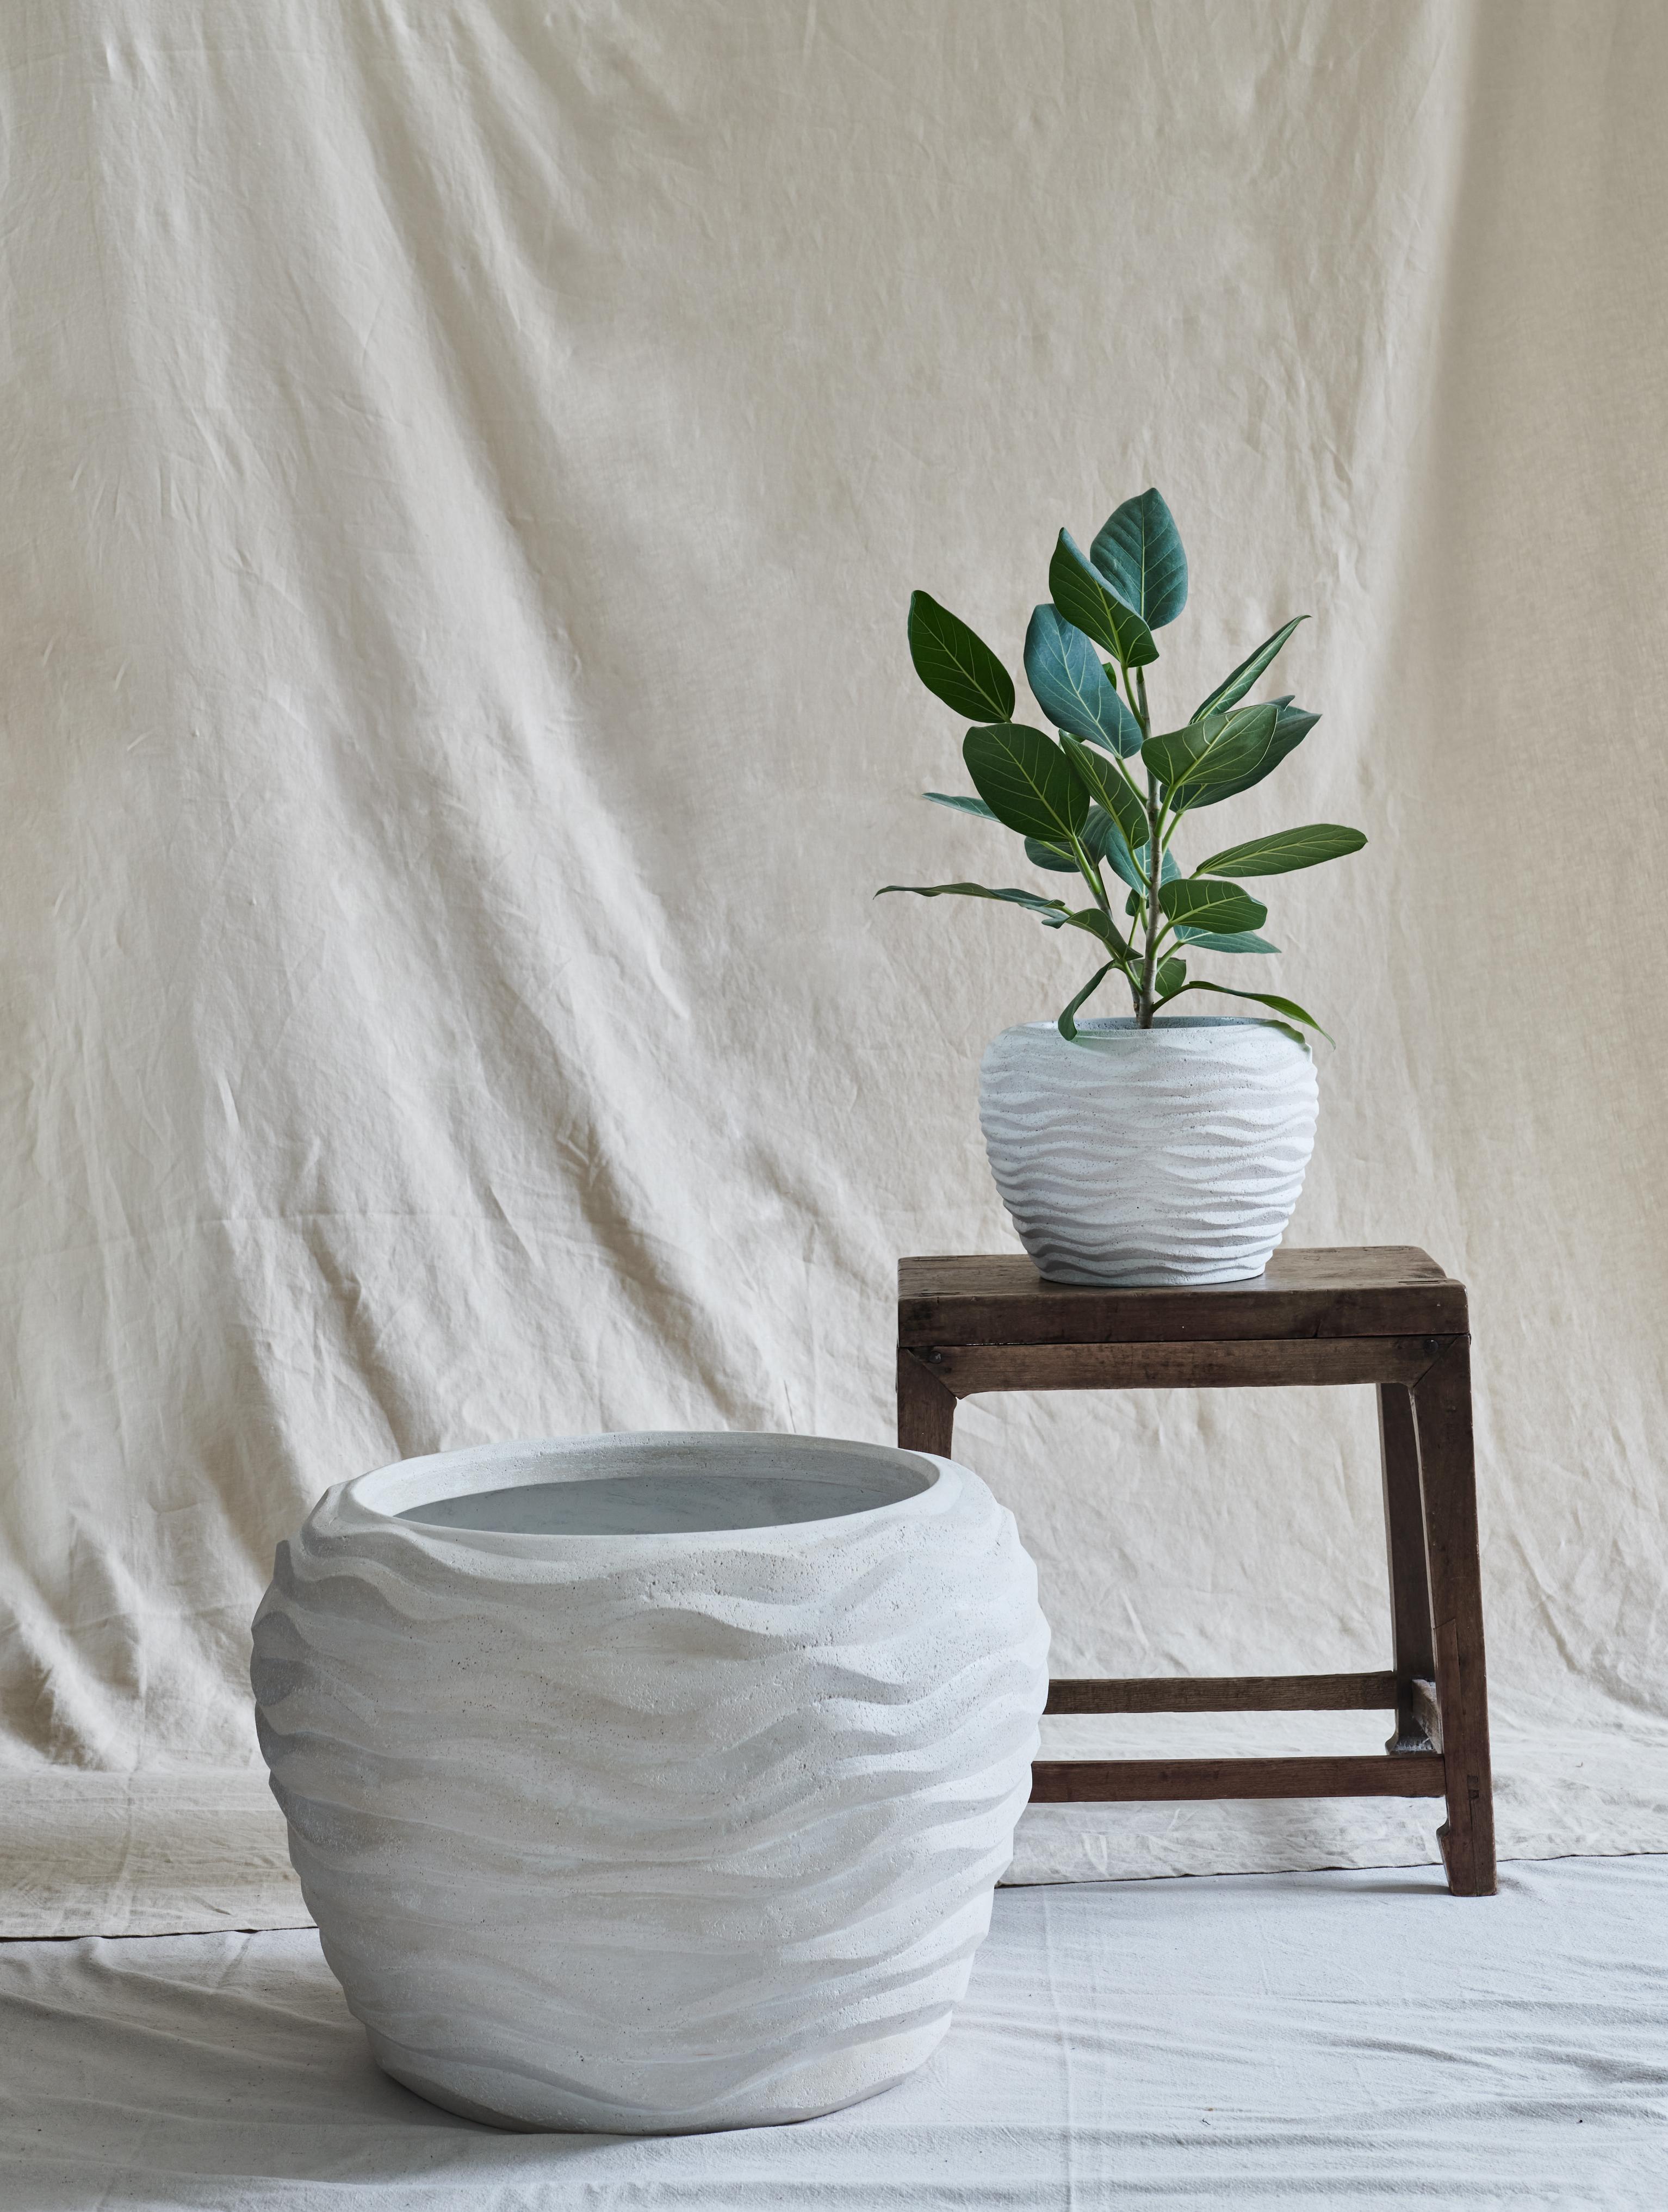 A small, stout, and round vessel with a wavy imprinted texture, reminiscent of the undulating petals of a carnation flower. 

For indoor or outdoor use.

Dimensions (in): 11